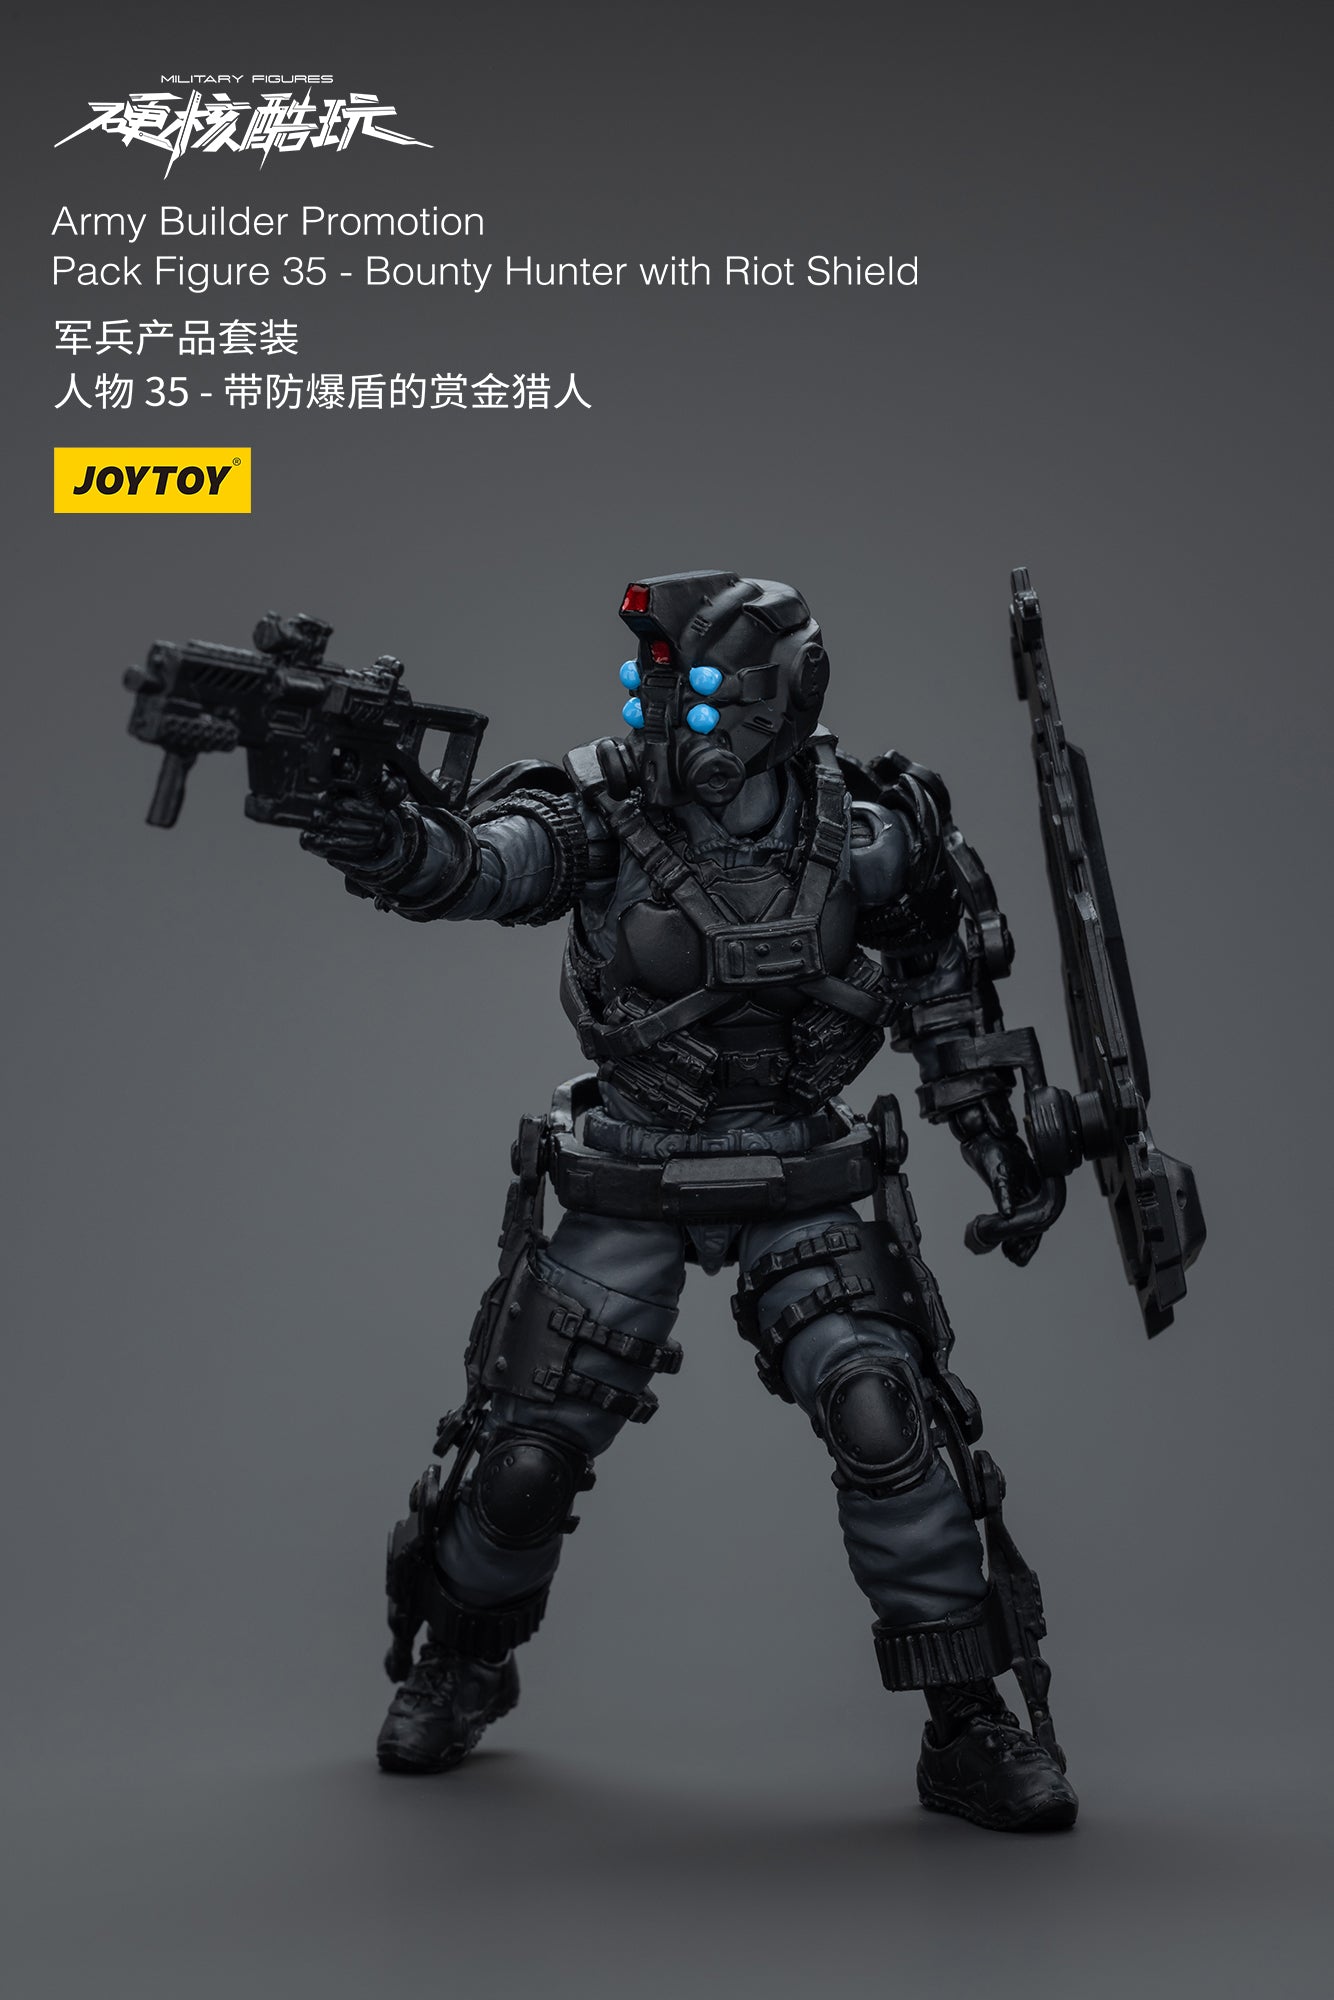 Army Builder Promotion Pack Figure 35 - Bounty Hunter with Riot Shield - Soldiers Action Figure By JOYTOY